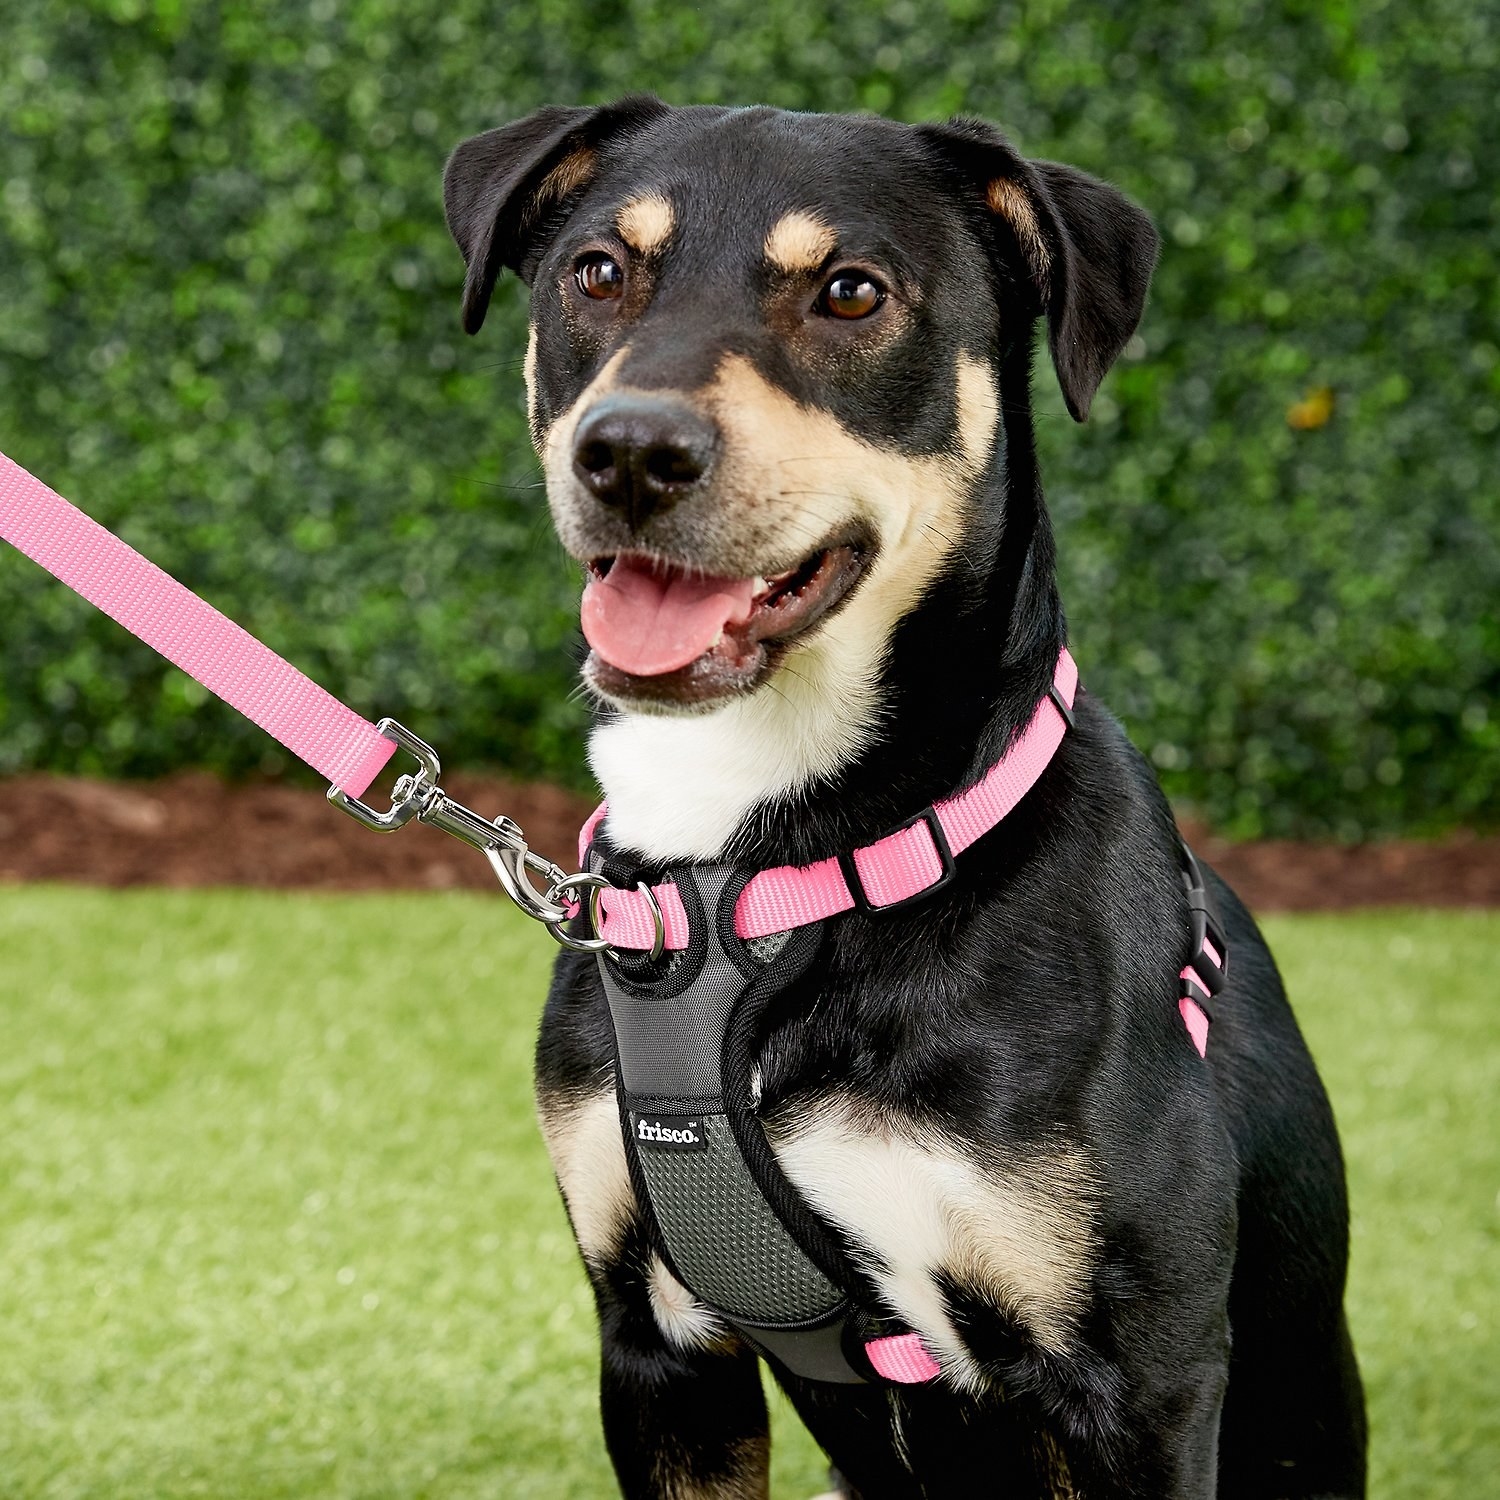 A dog wearing the harness in pink